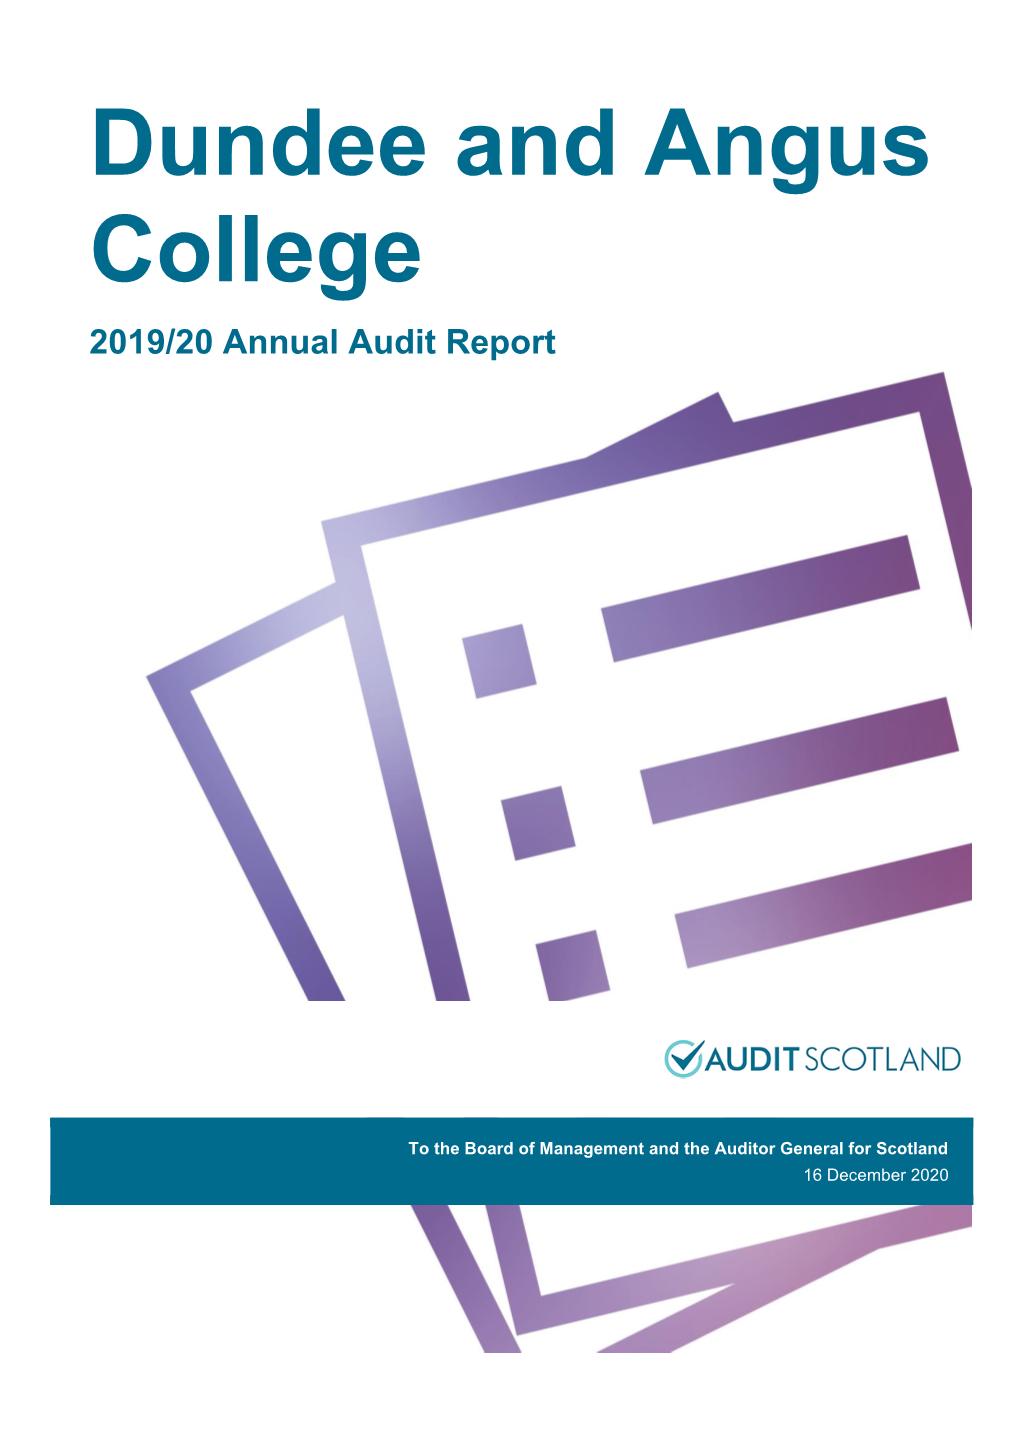 Dundee and Angus College 2019/20 Annual Audit Report